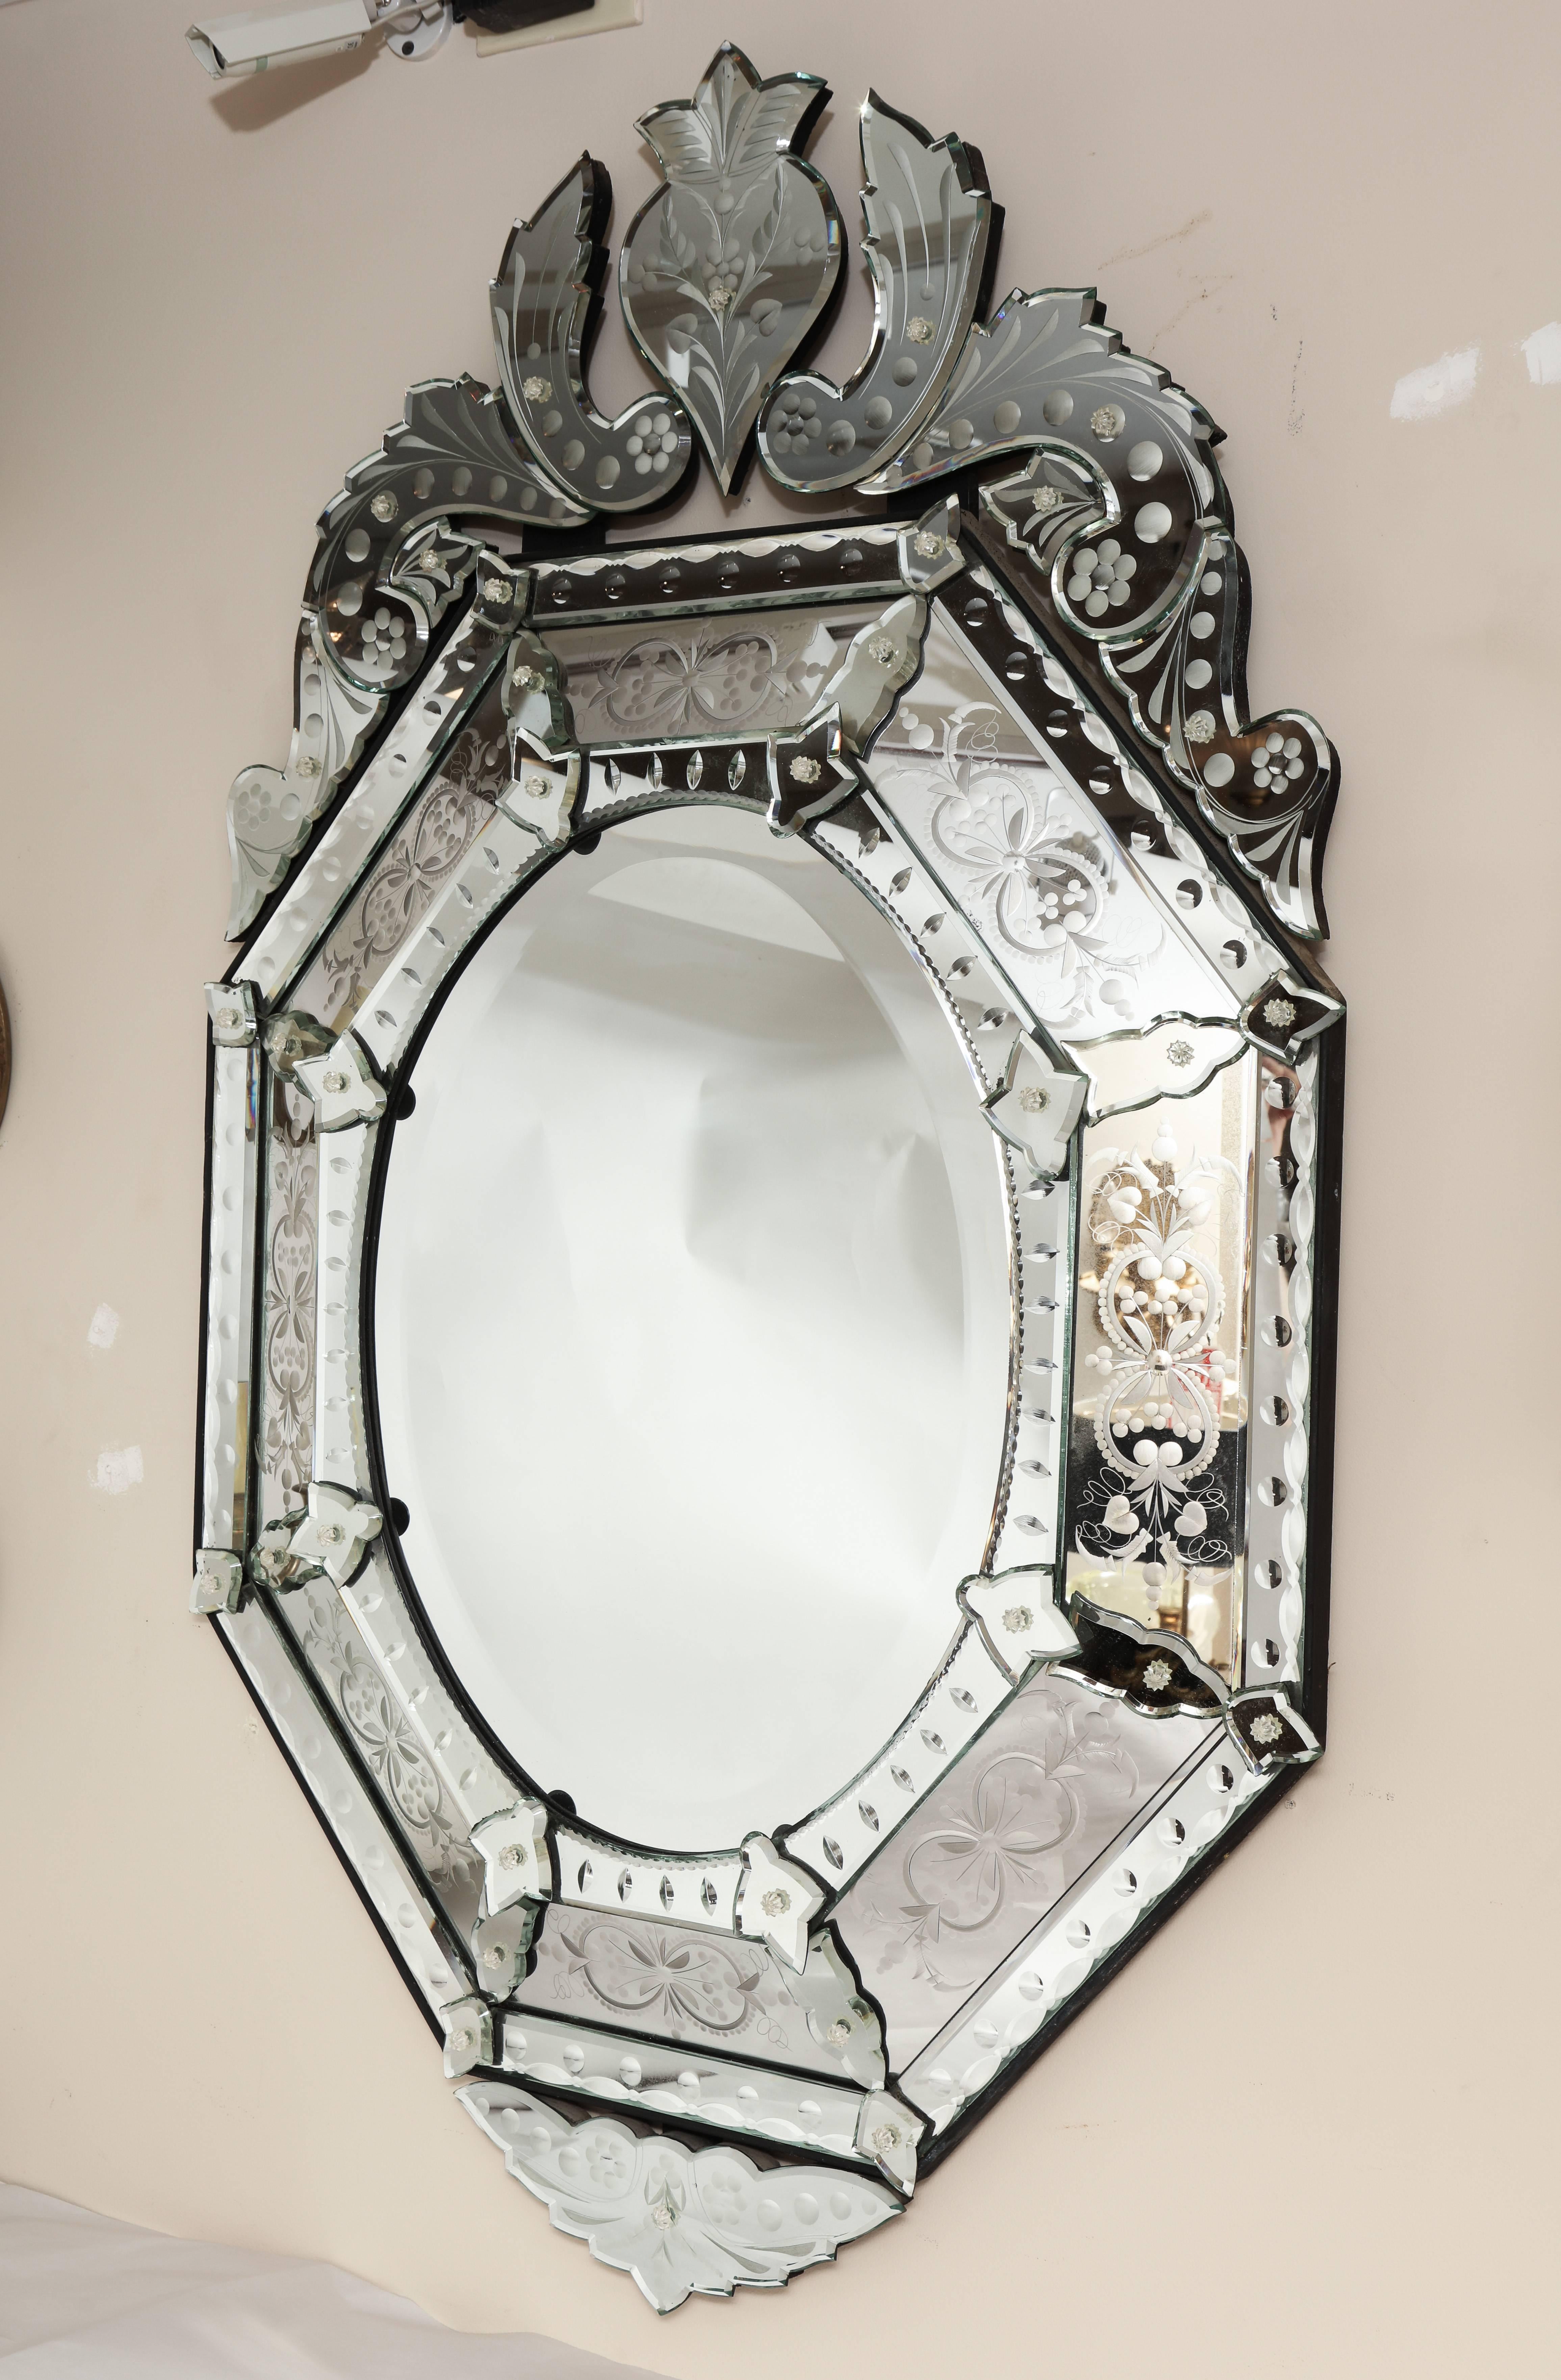 A Venetian etched-glass mirror, scroll form and leafy spray cartouche, the central oval beveled glass having mirrored outer frame with reversed glass etching and carving, each section of molding secured by mirrored rosettes.